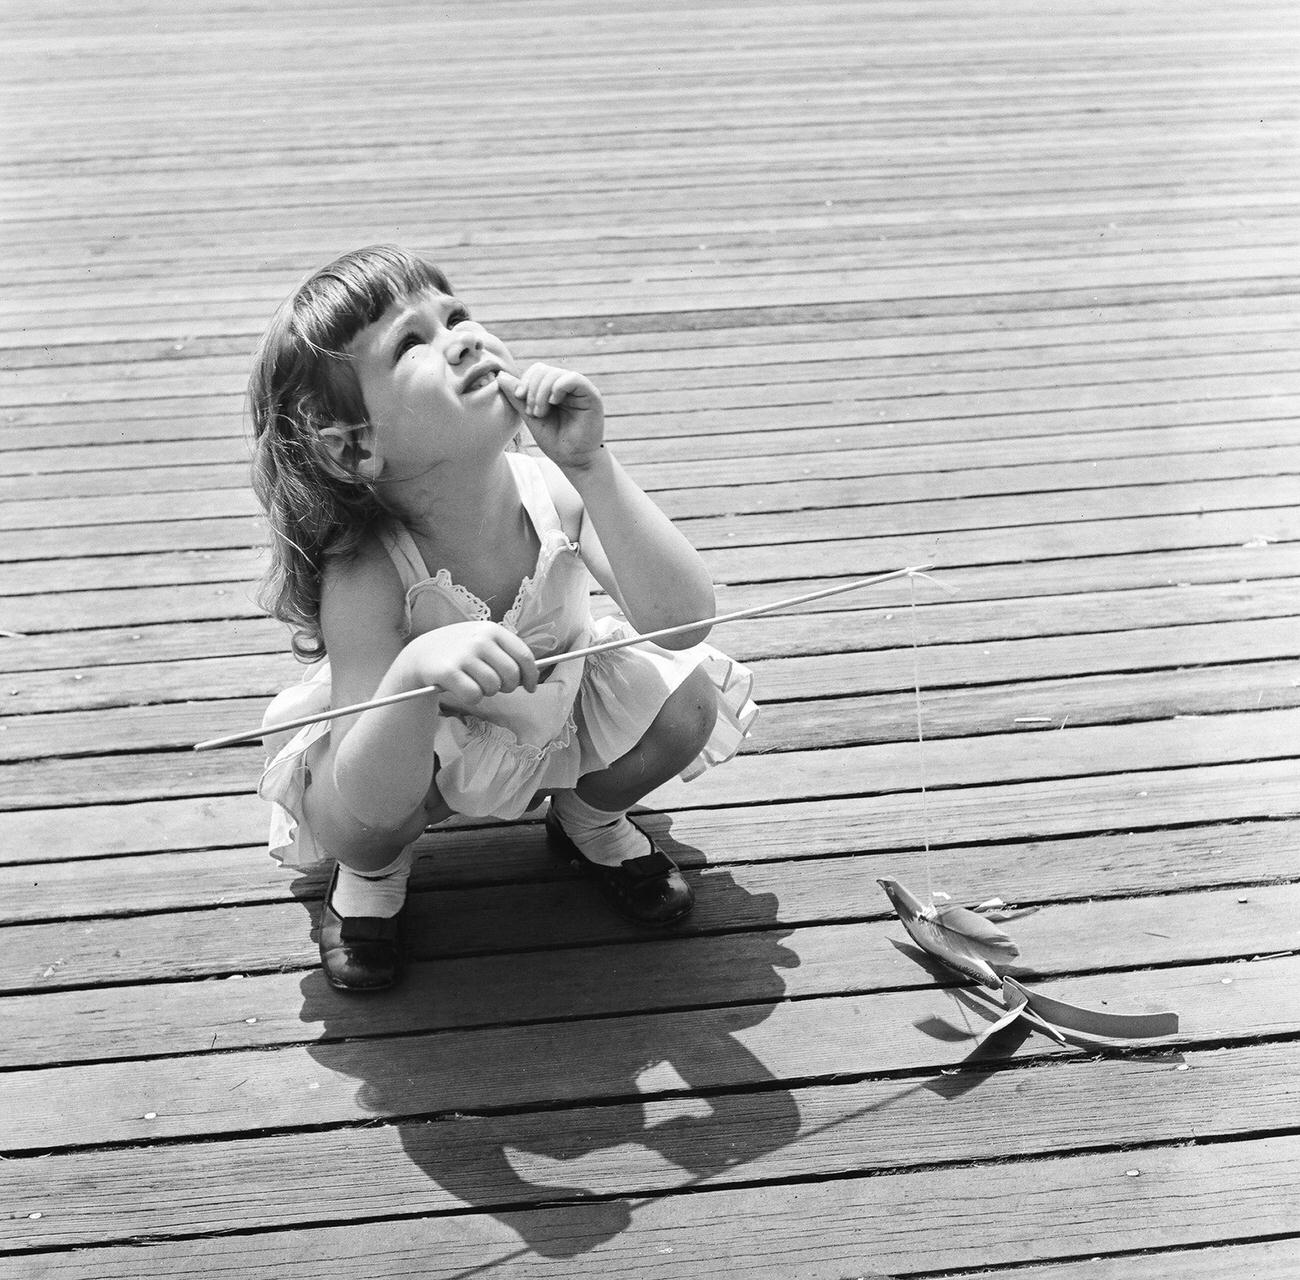 Young Girl Holds A Whirling Bird Toy On Coney Island Boardwalk, 1948